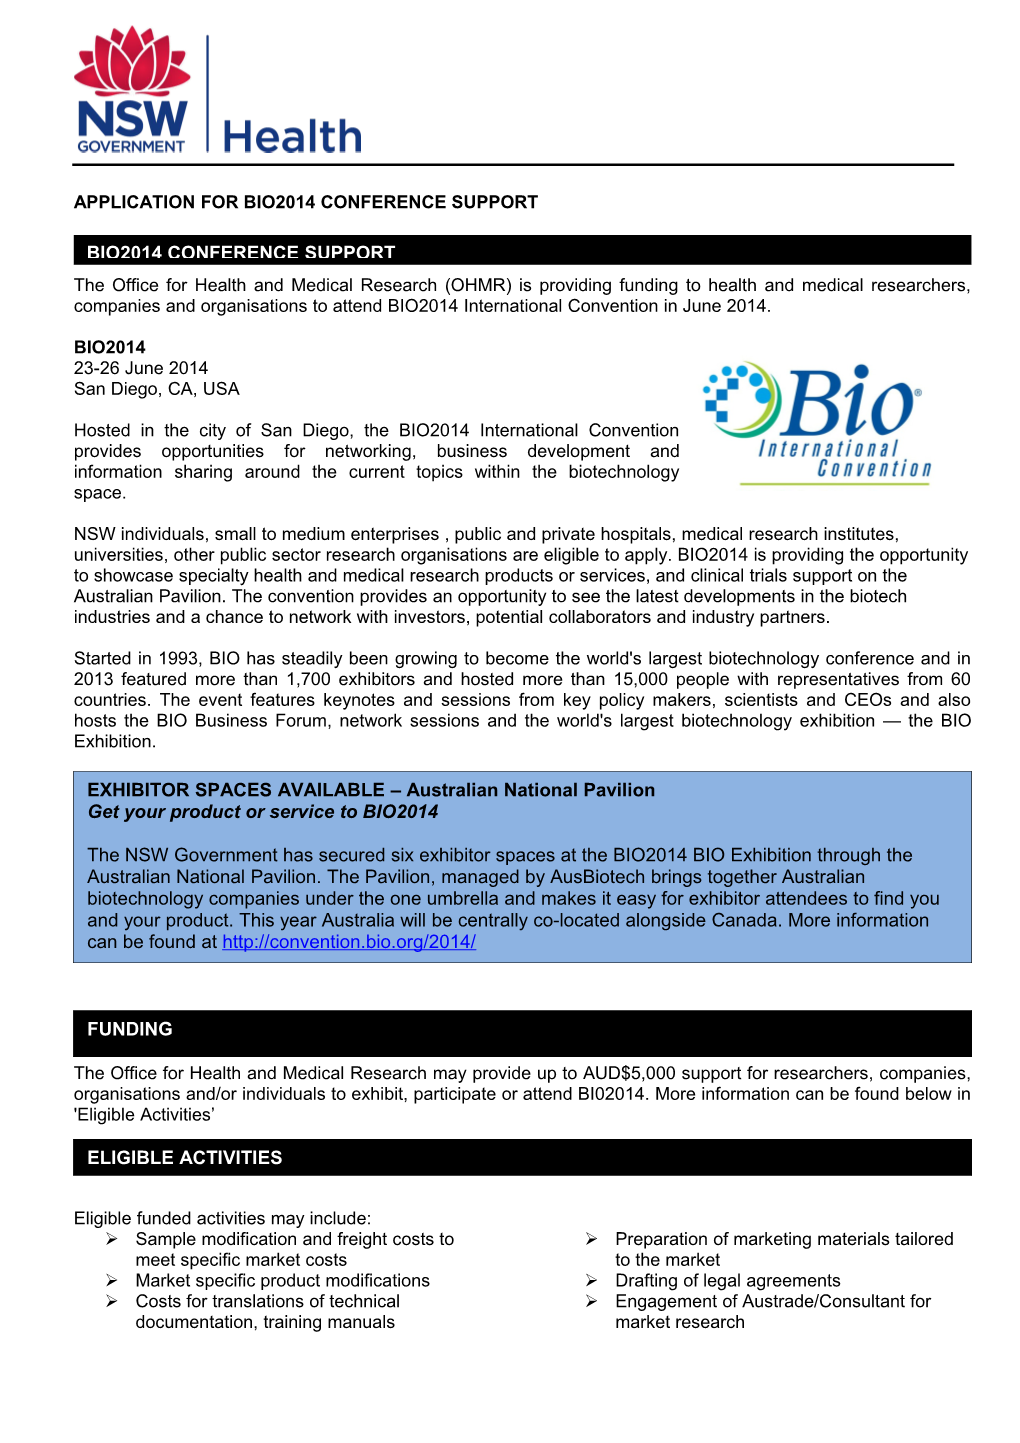 Application for Bio2014 Conference Support